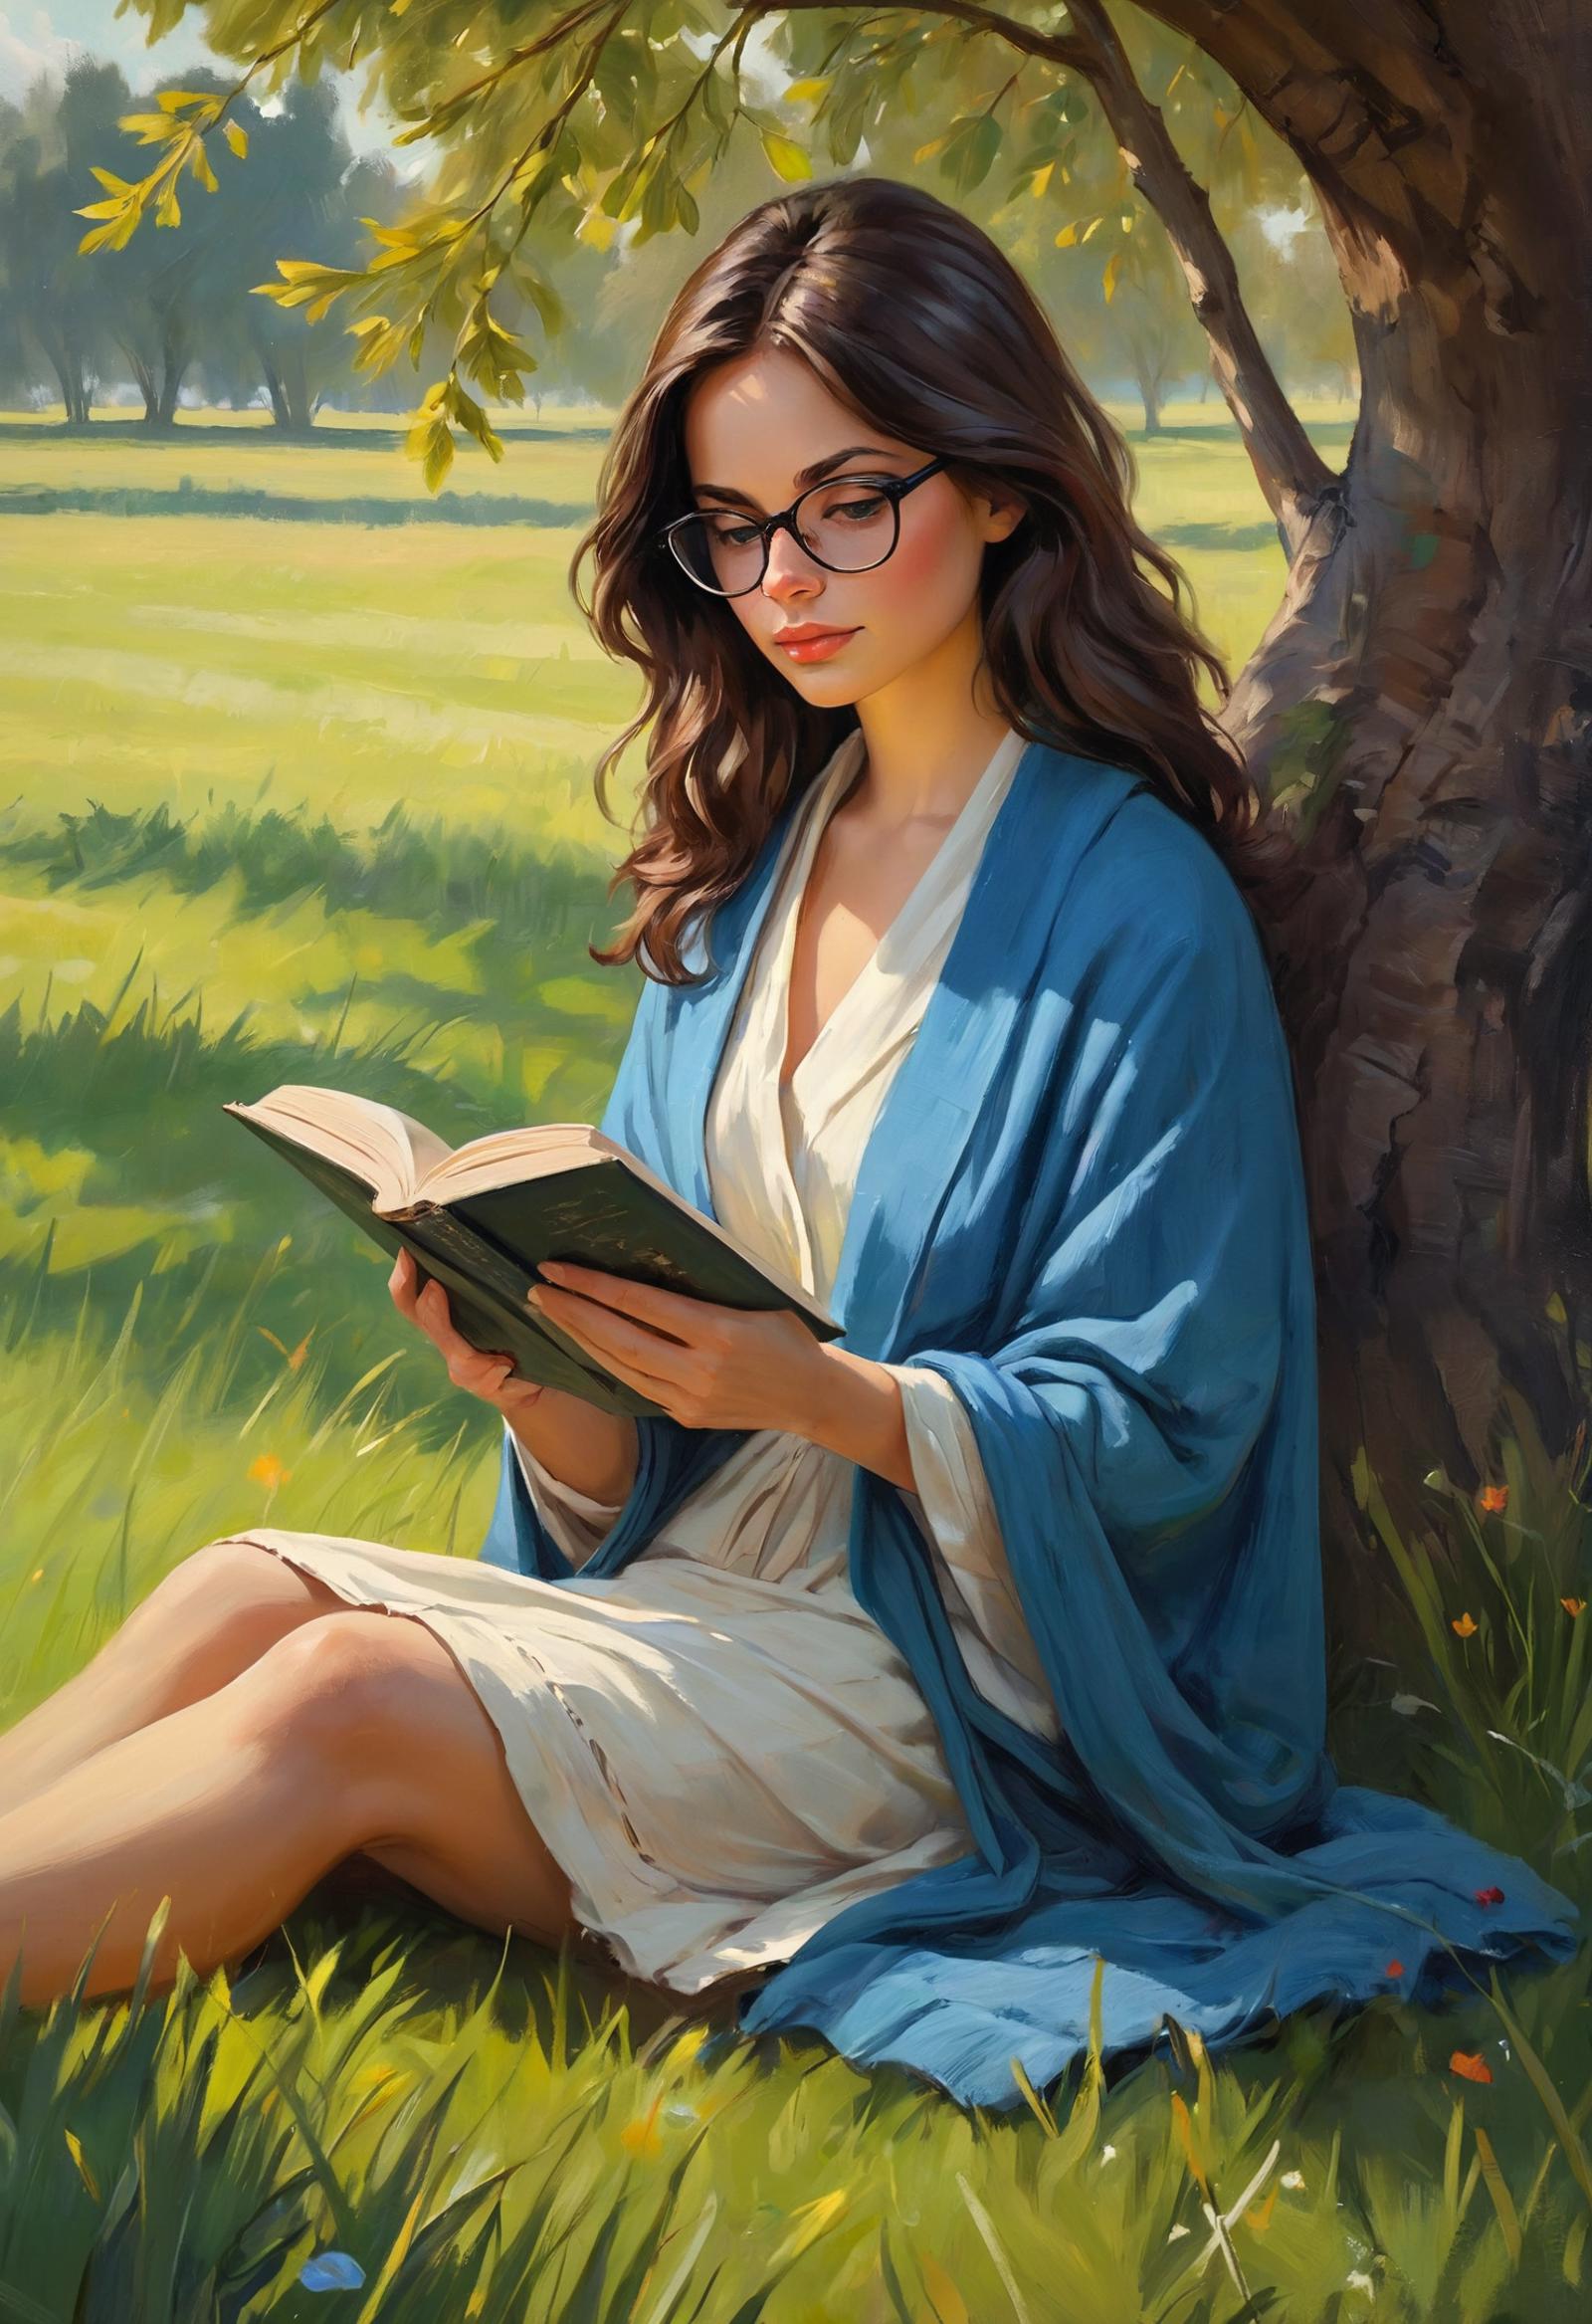 A painting of a woman wearing glasses and a white dress, reading a book under a tree.